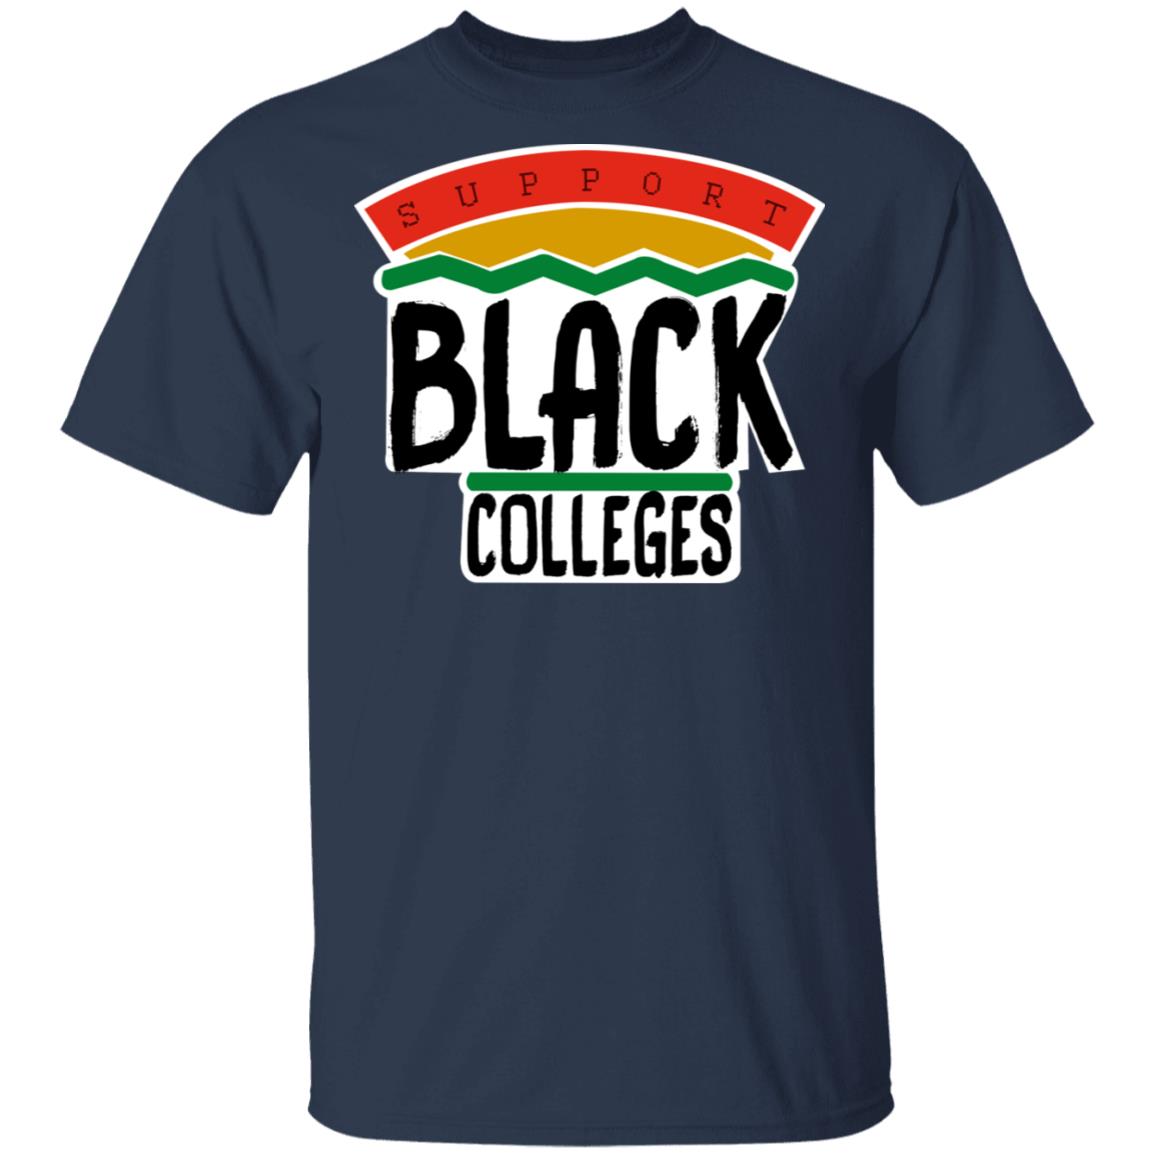 Support Black Colleges Shirt | Allbluetees.com